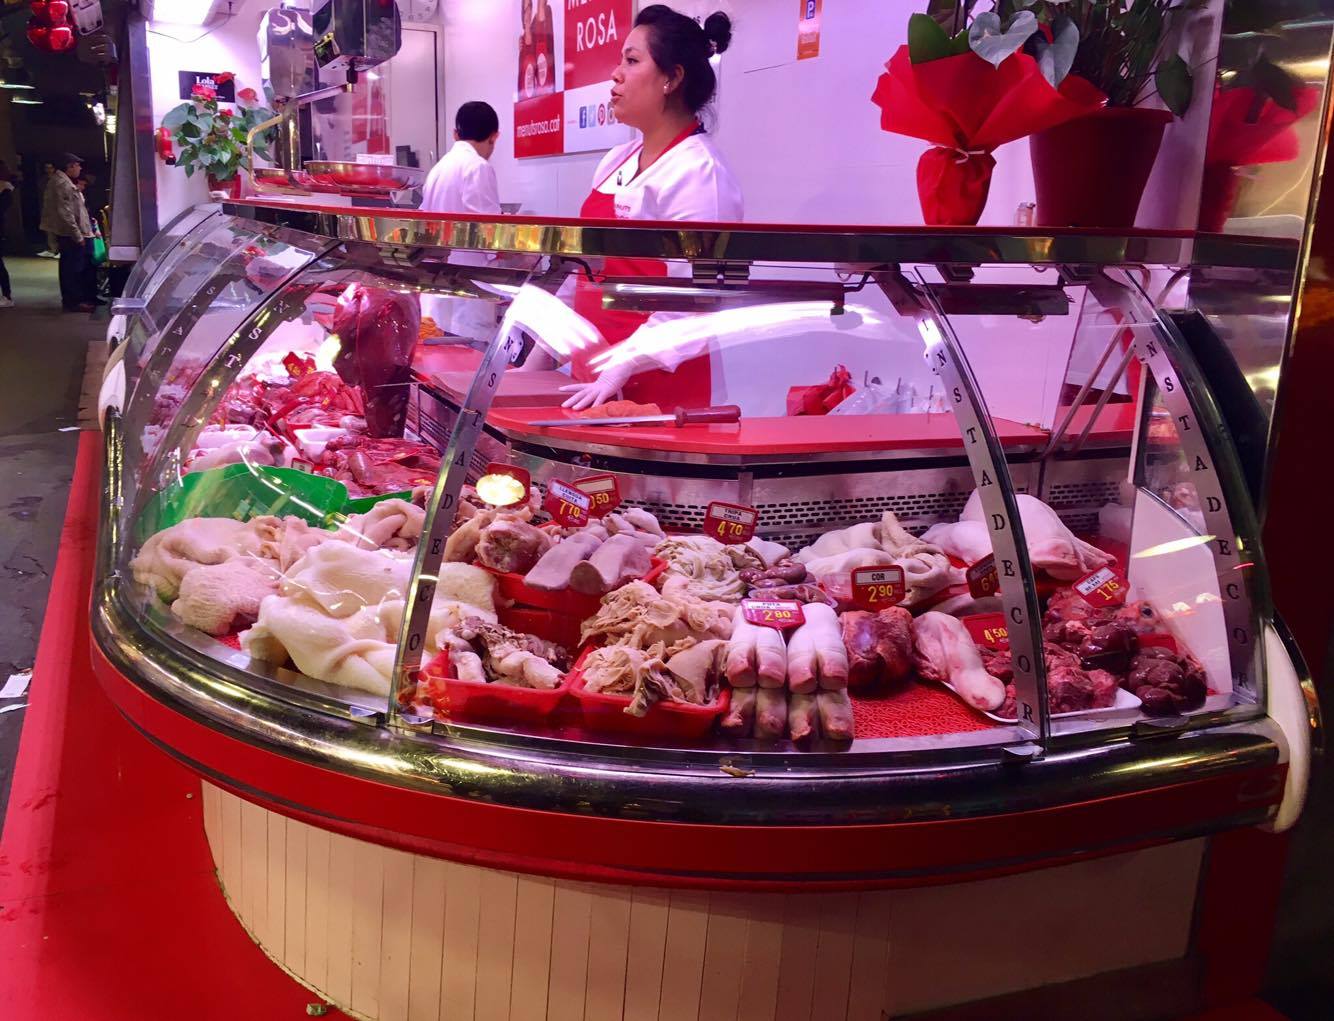  A butcher selling pig hooves, and tripe. Dim sum, anyone? 